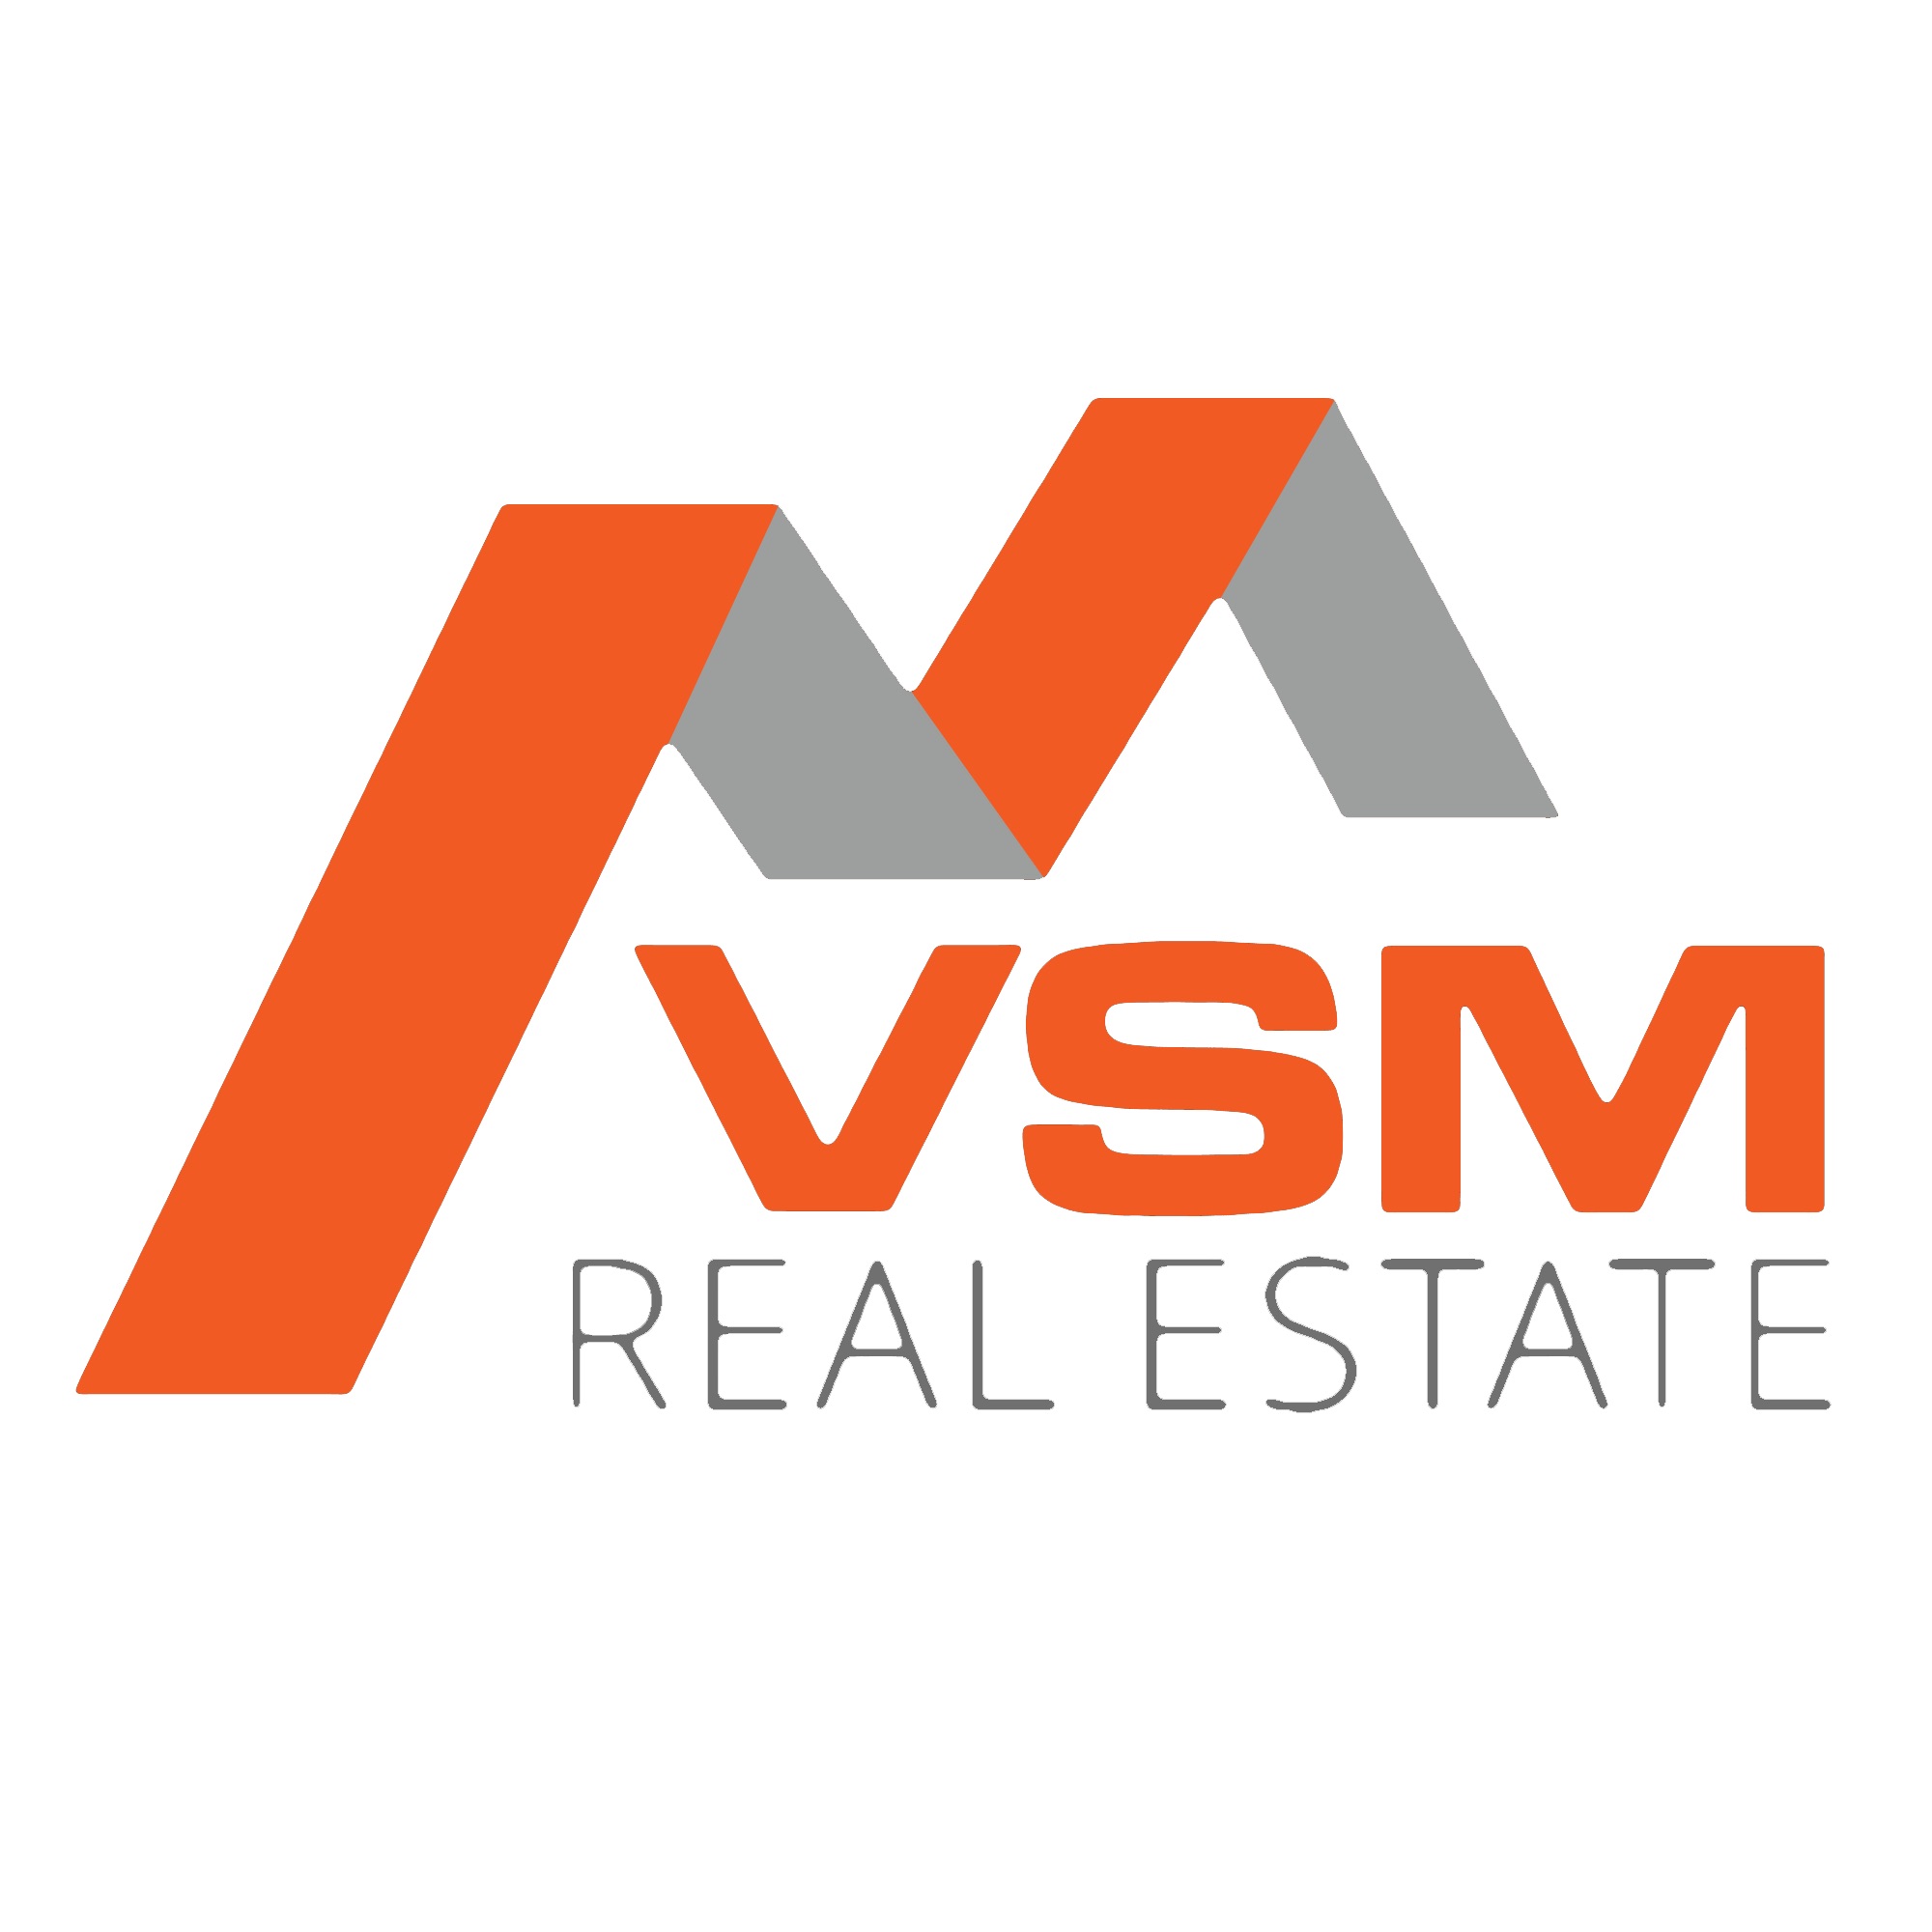 VSM | Companies: Your Practical Real Estate Source